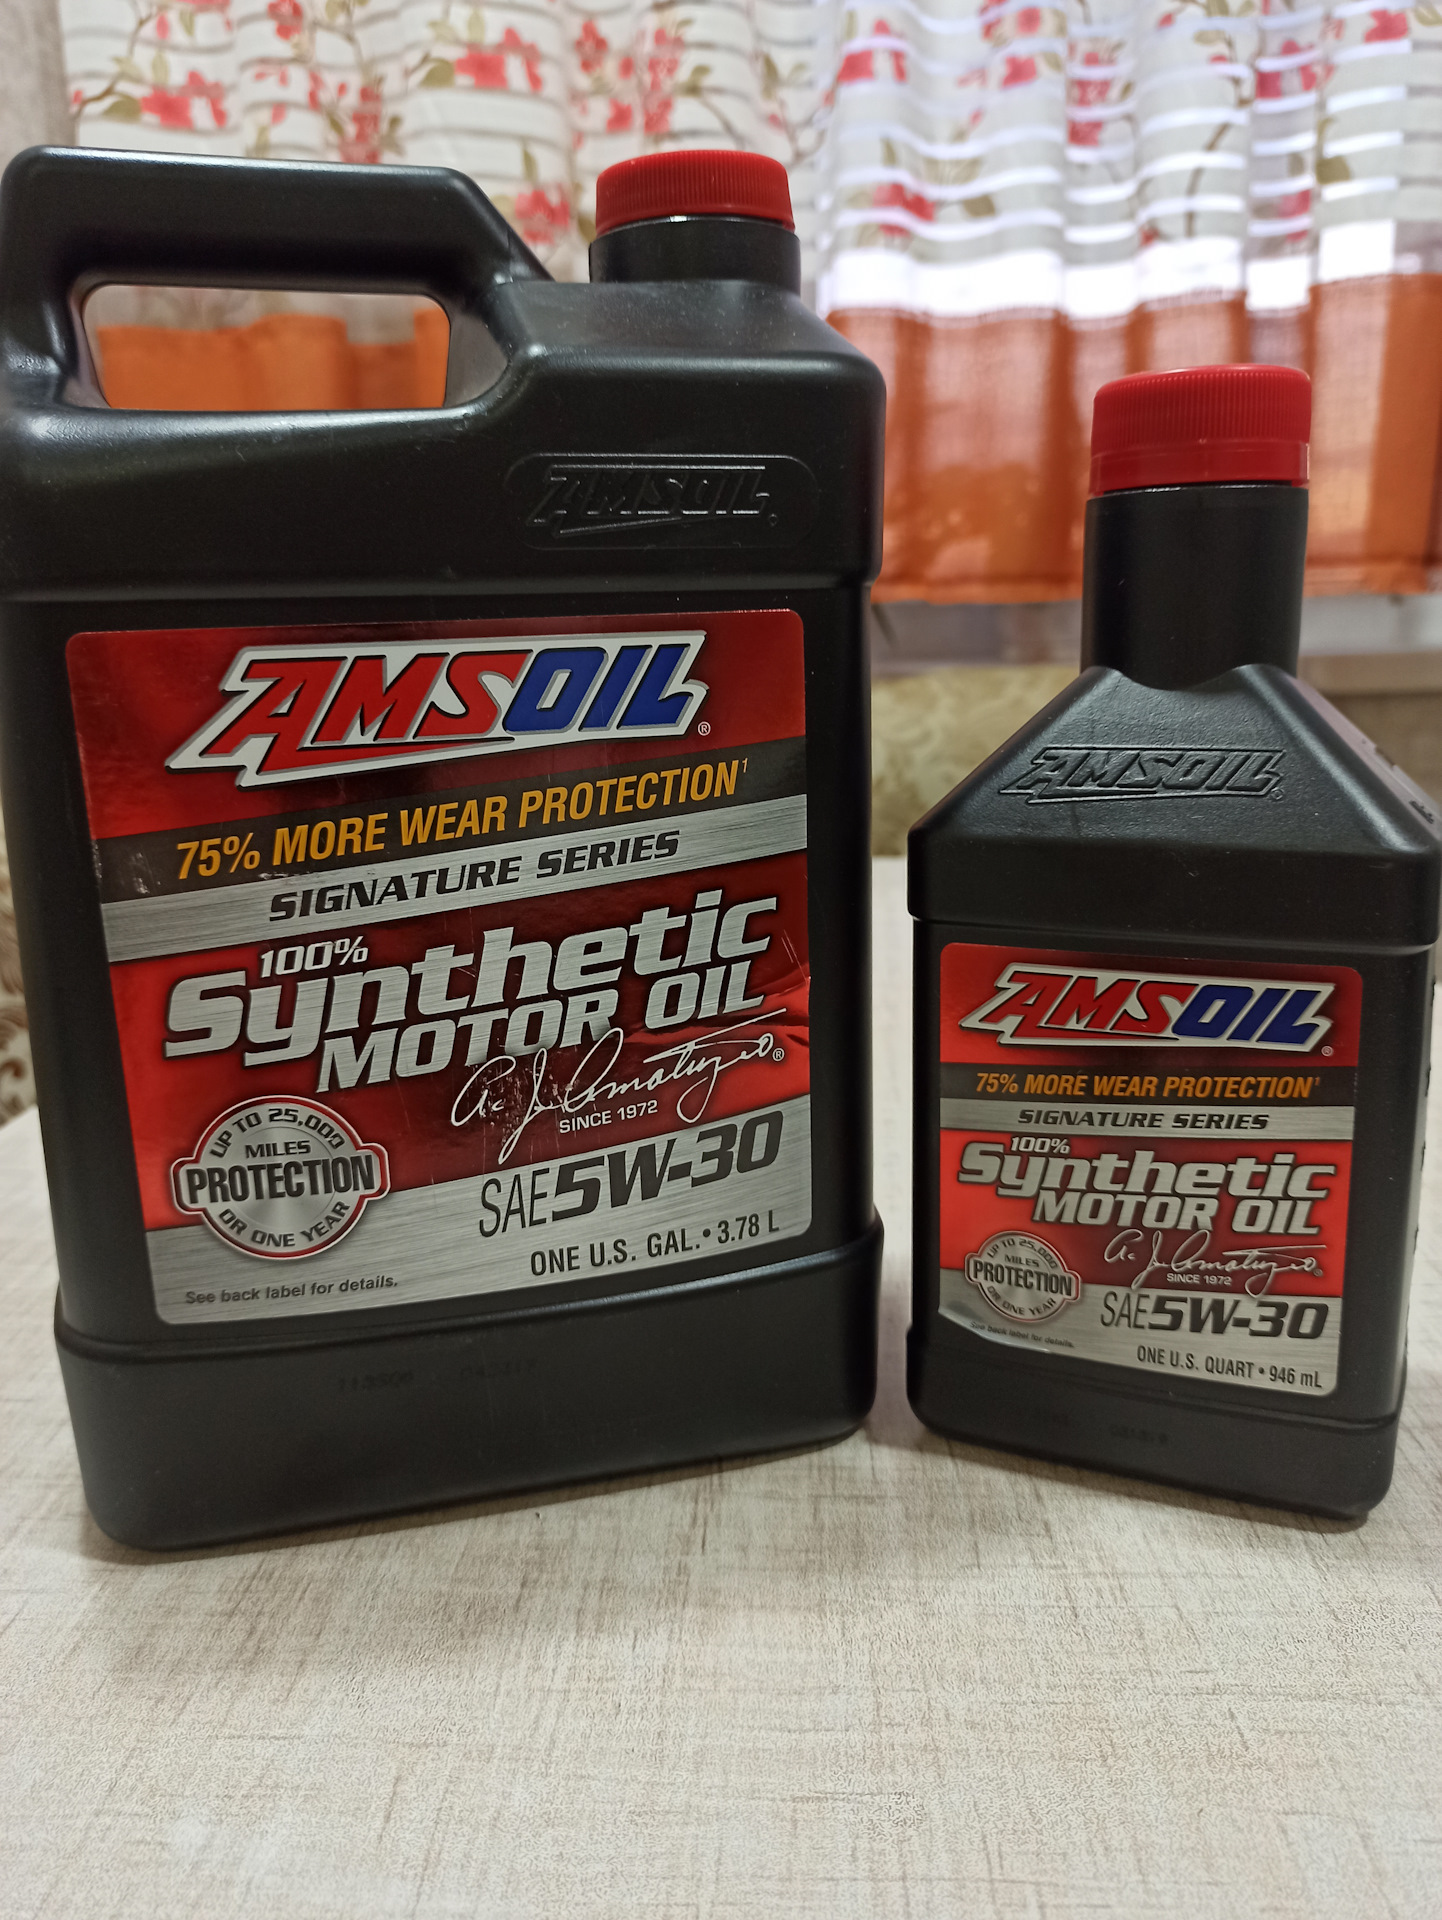 Amsoil signature series synthetic. AMSOIL Signature Series 5w-30 артикул. AMSOIL Signature Series 5w-30 Synthetic Motor oi. Napa AMSOIL.